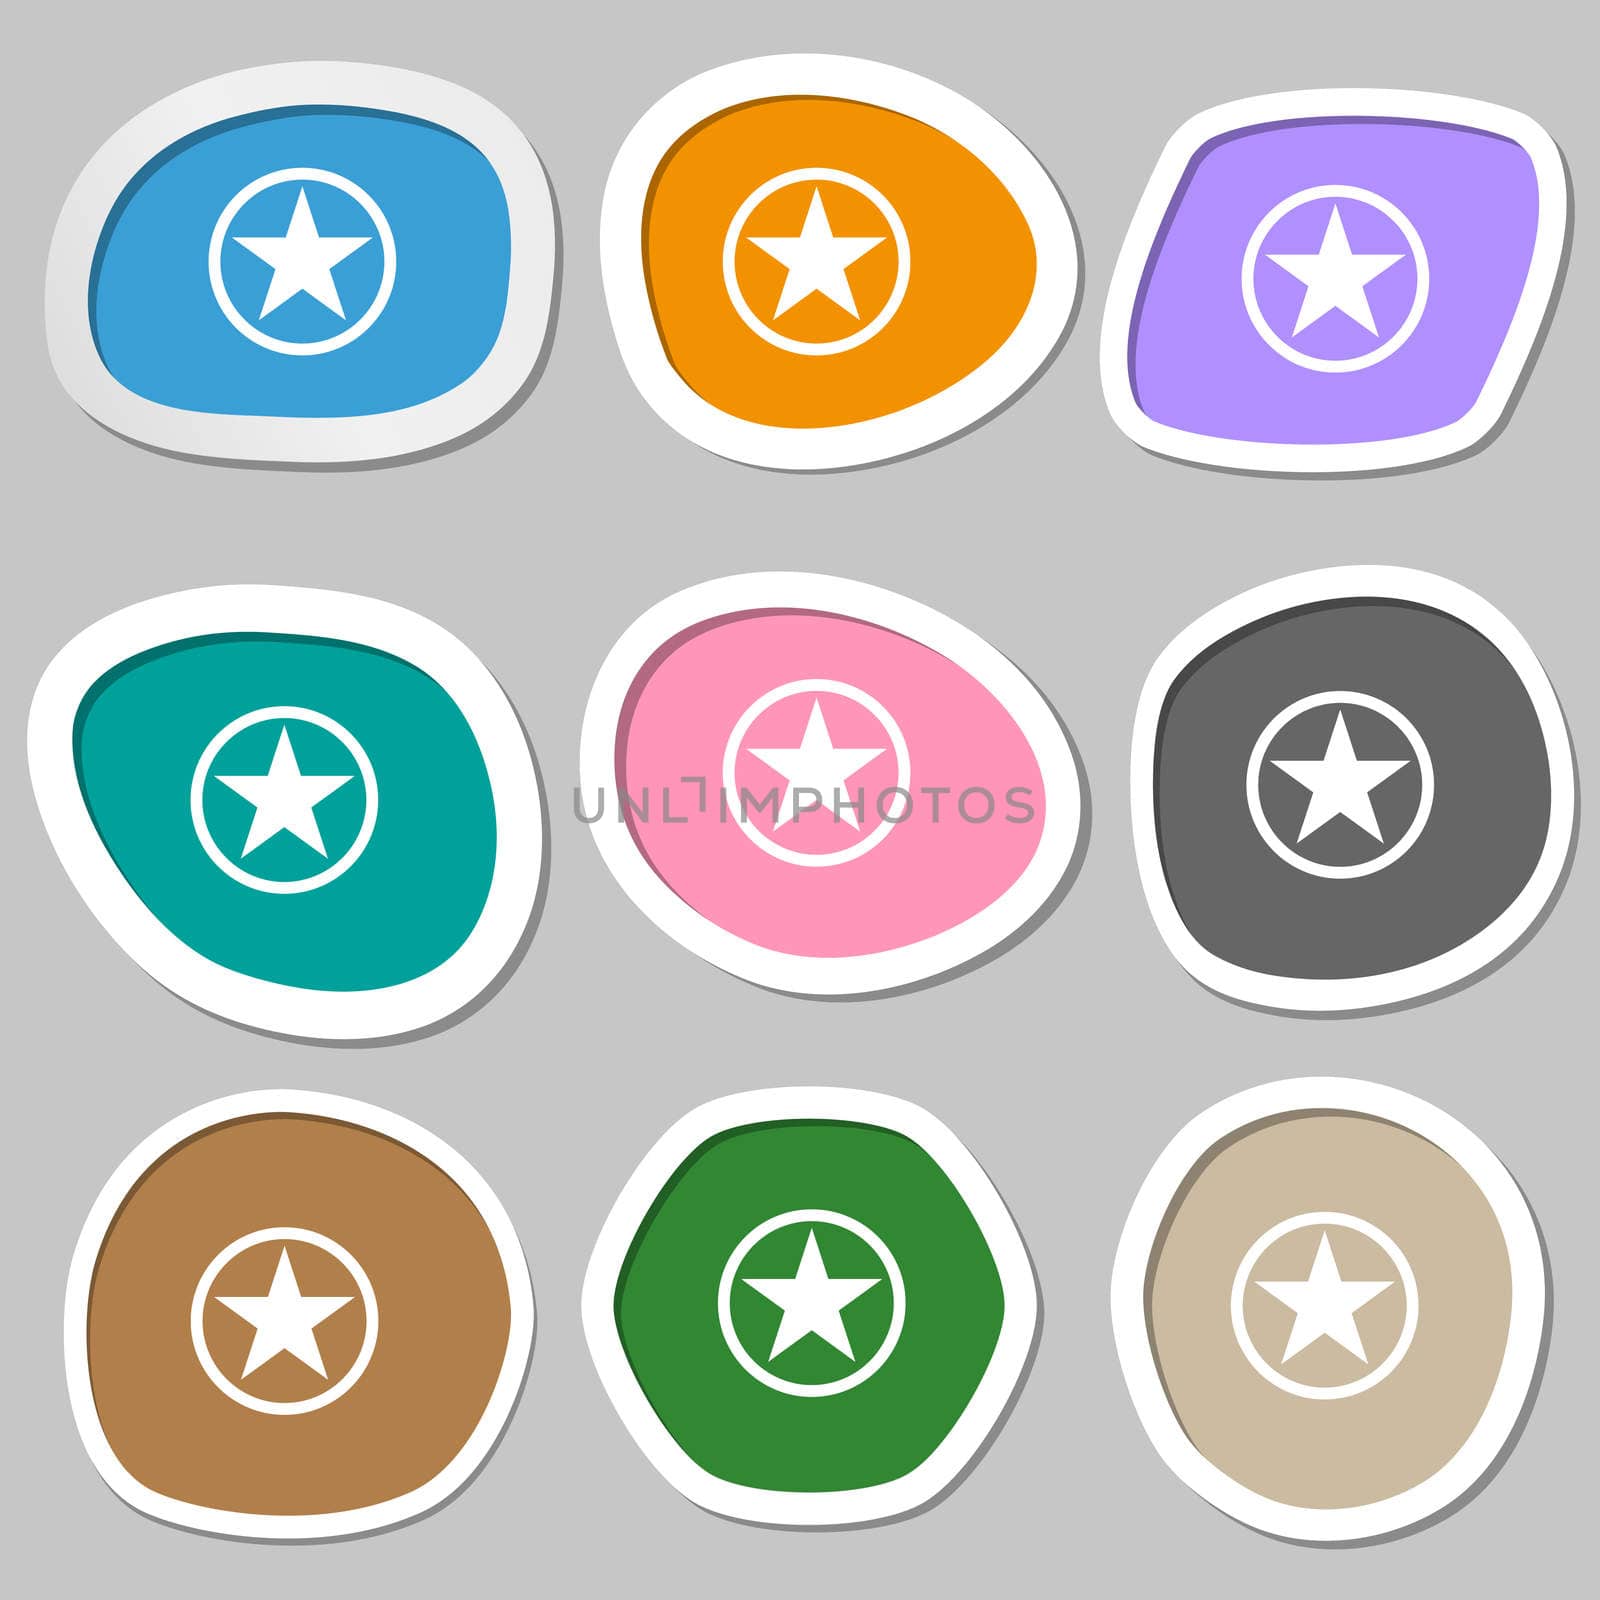 Star, Favorite icon symbols. Multicolored paper stickers.  by serhii_lohvyniuk